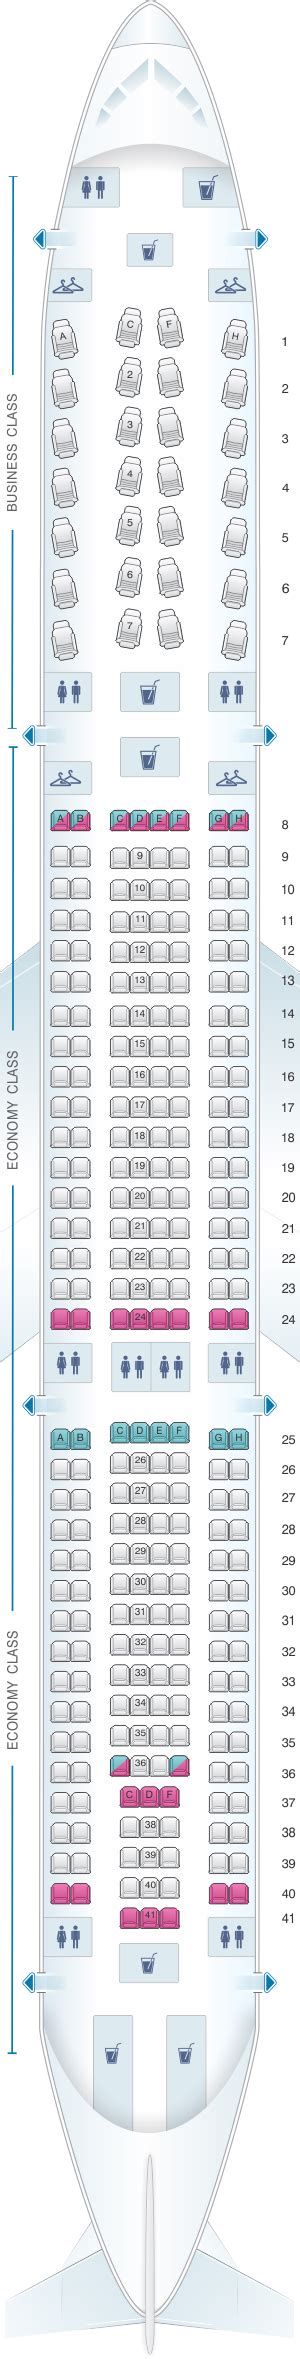 Seat Map American Airlines Airbus A330 300 Seatmaestro